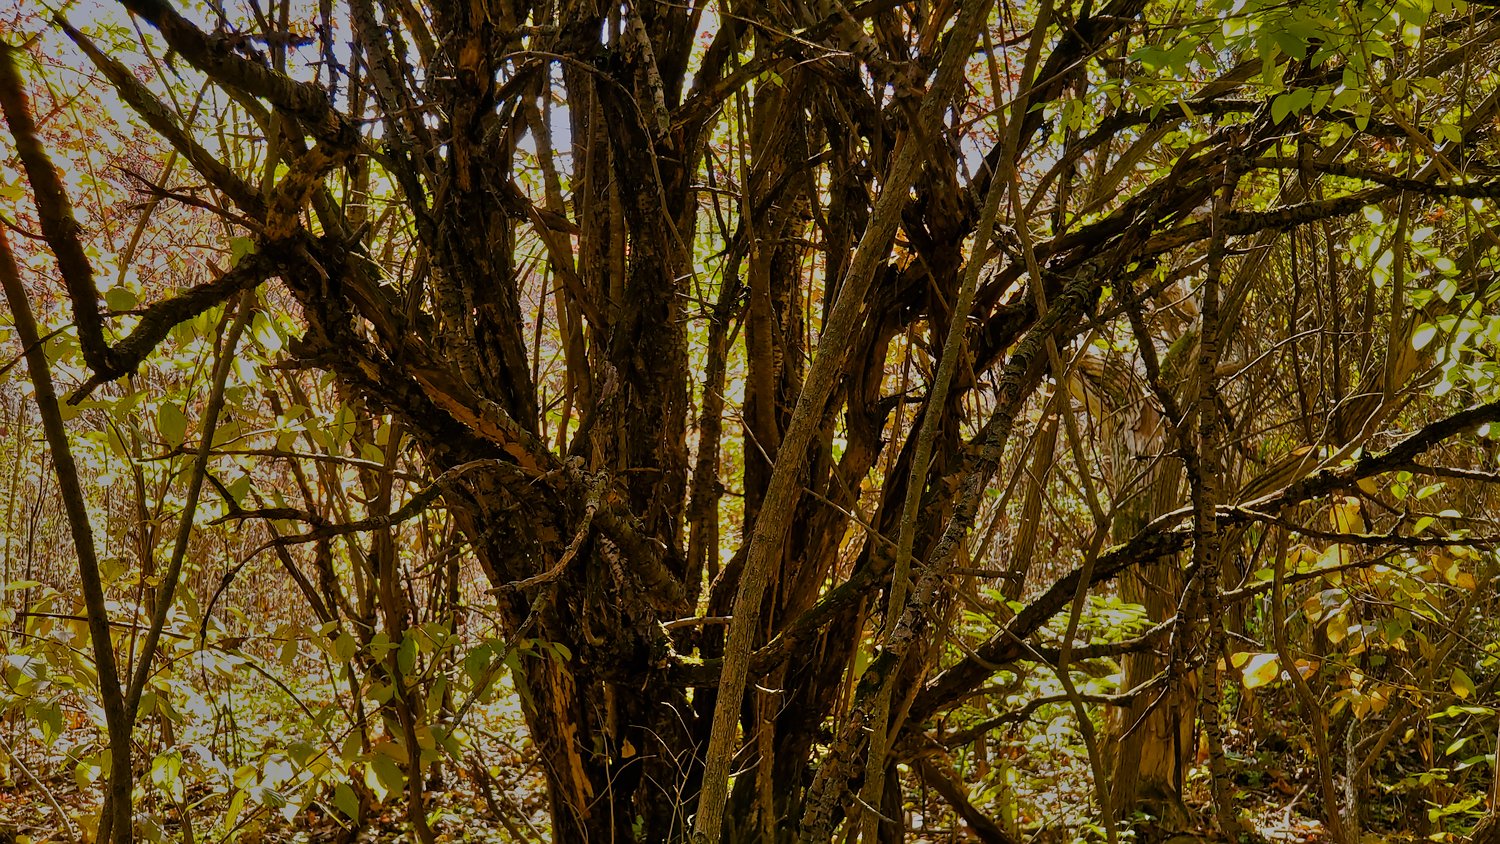 A tangle of growth at Rush Creek Conservation Area.